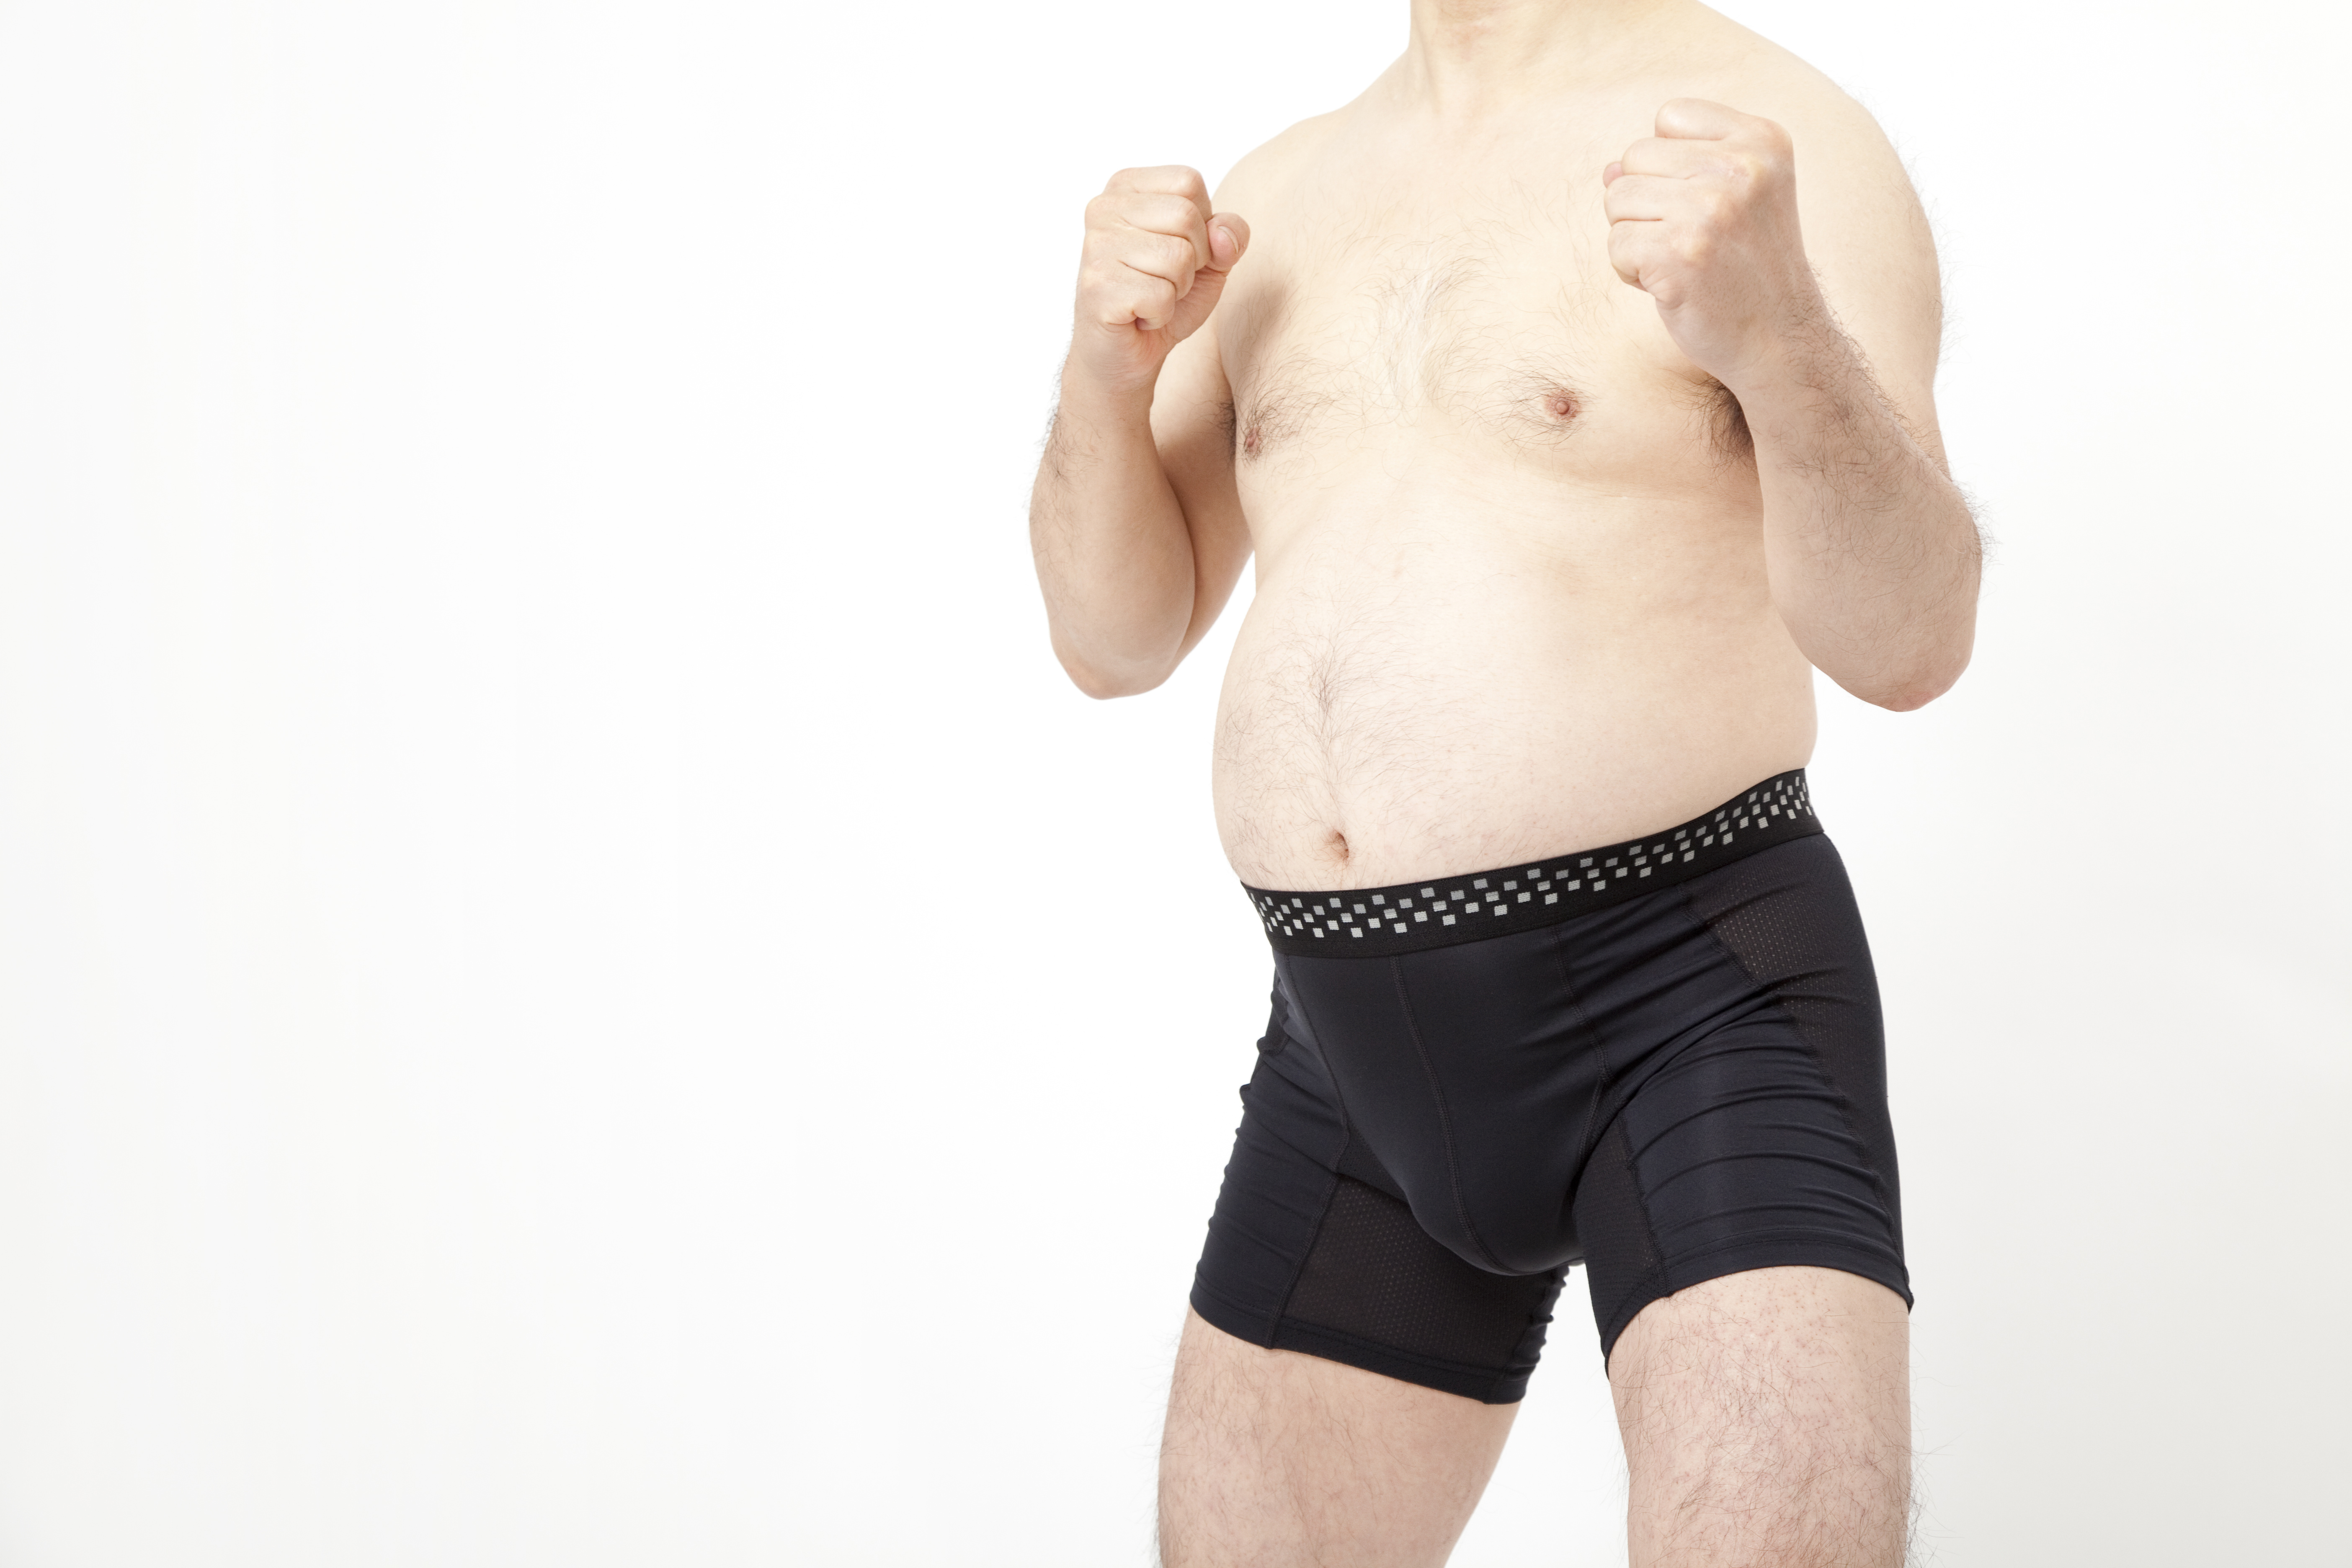 Beat the ‘Dad Bod’ this Christmas